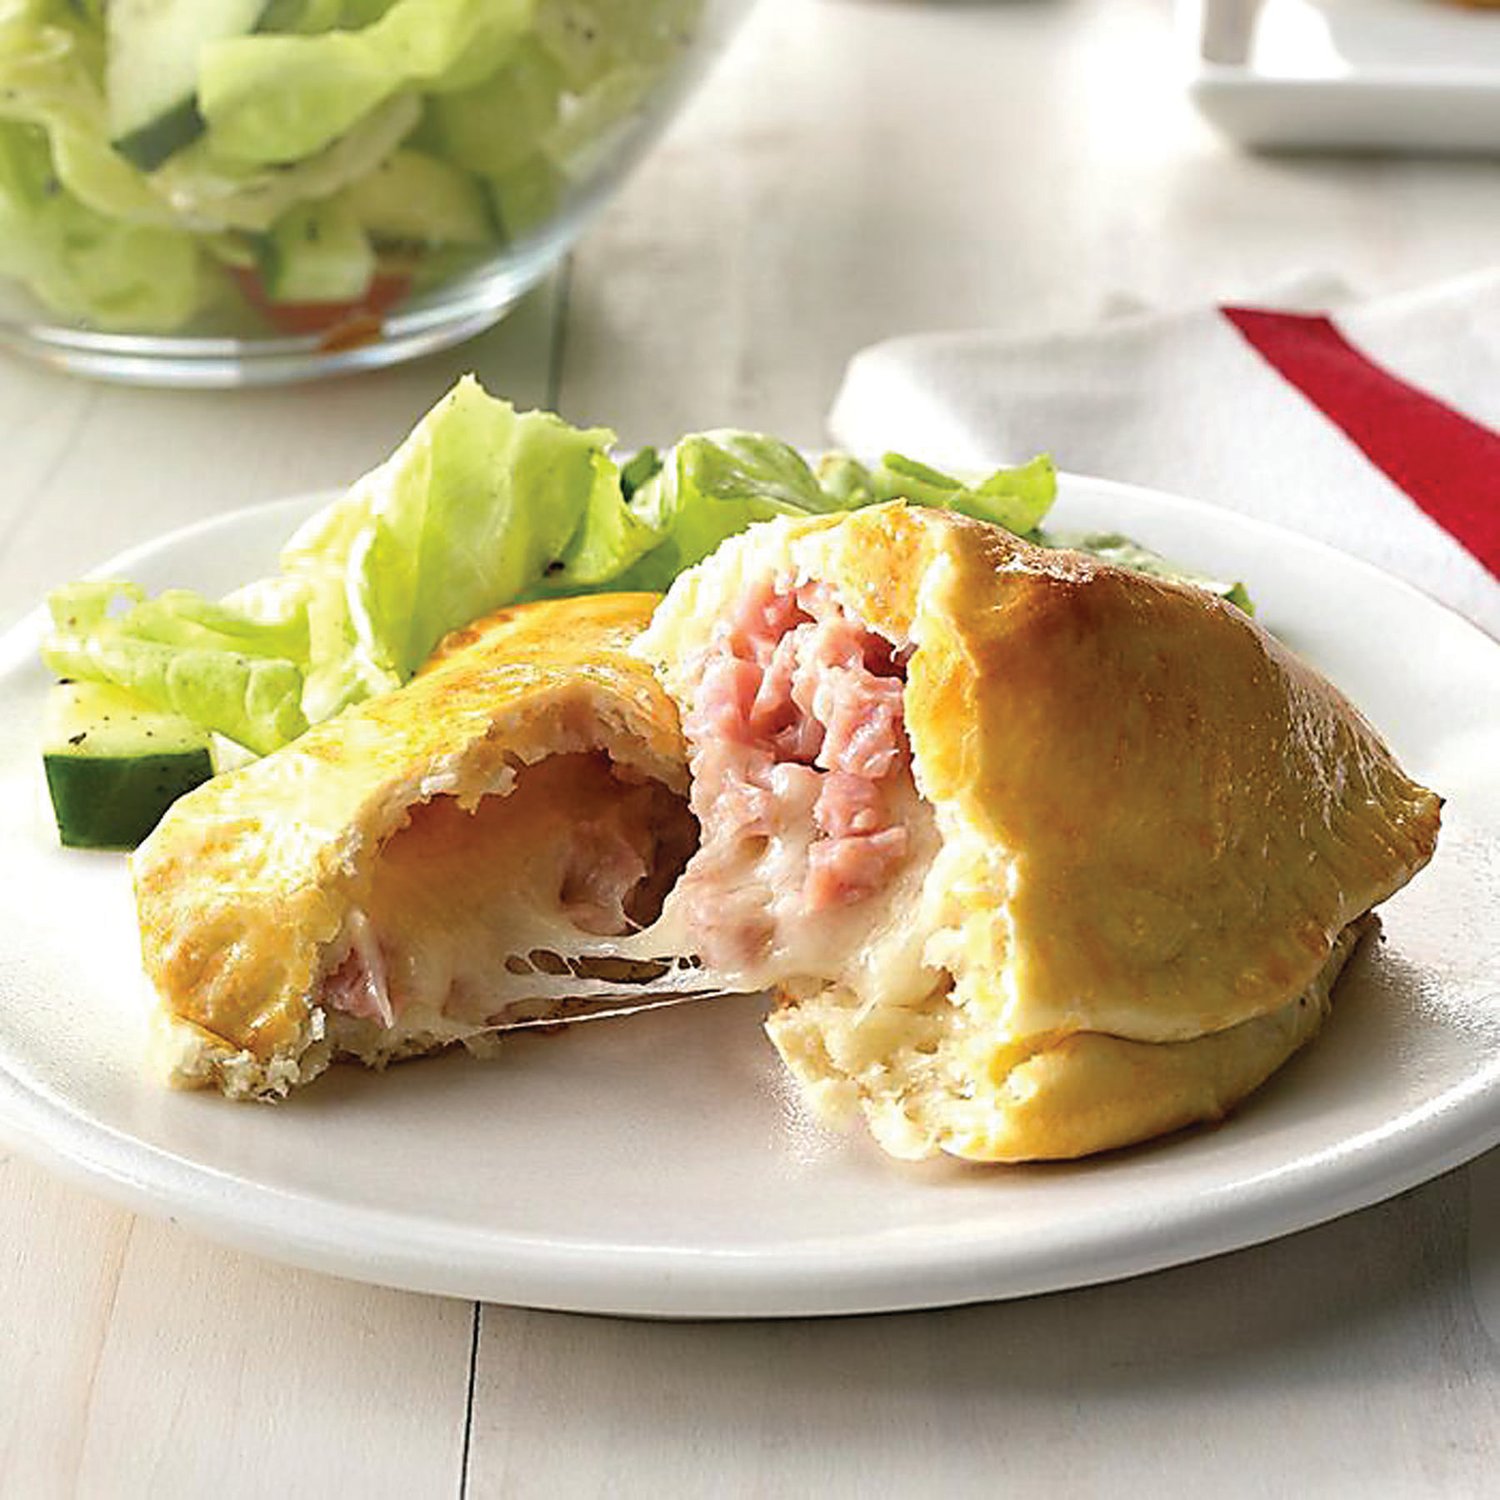 Ham and cheese pockets can be made ahead of time using a loaf of frozen bread. They can be served hot or cold.